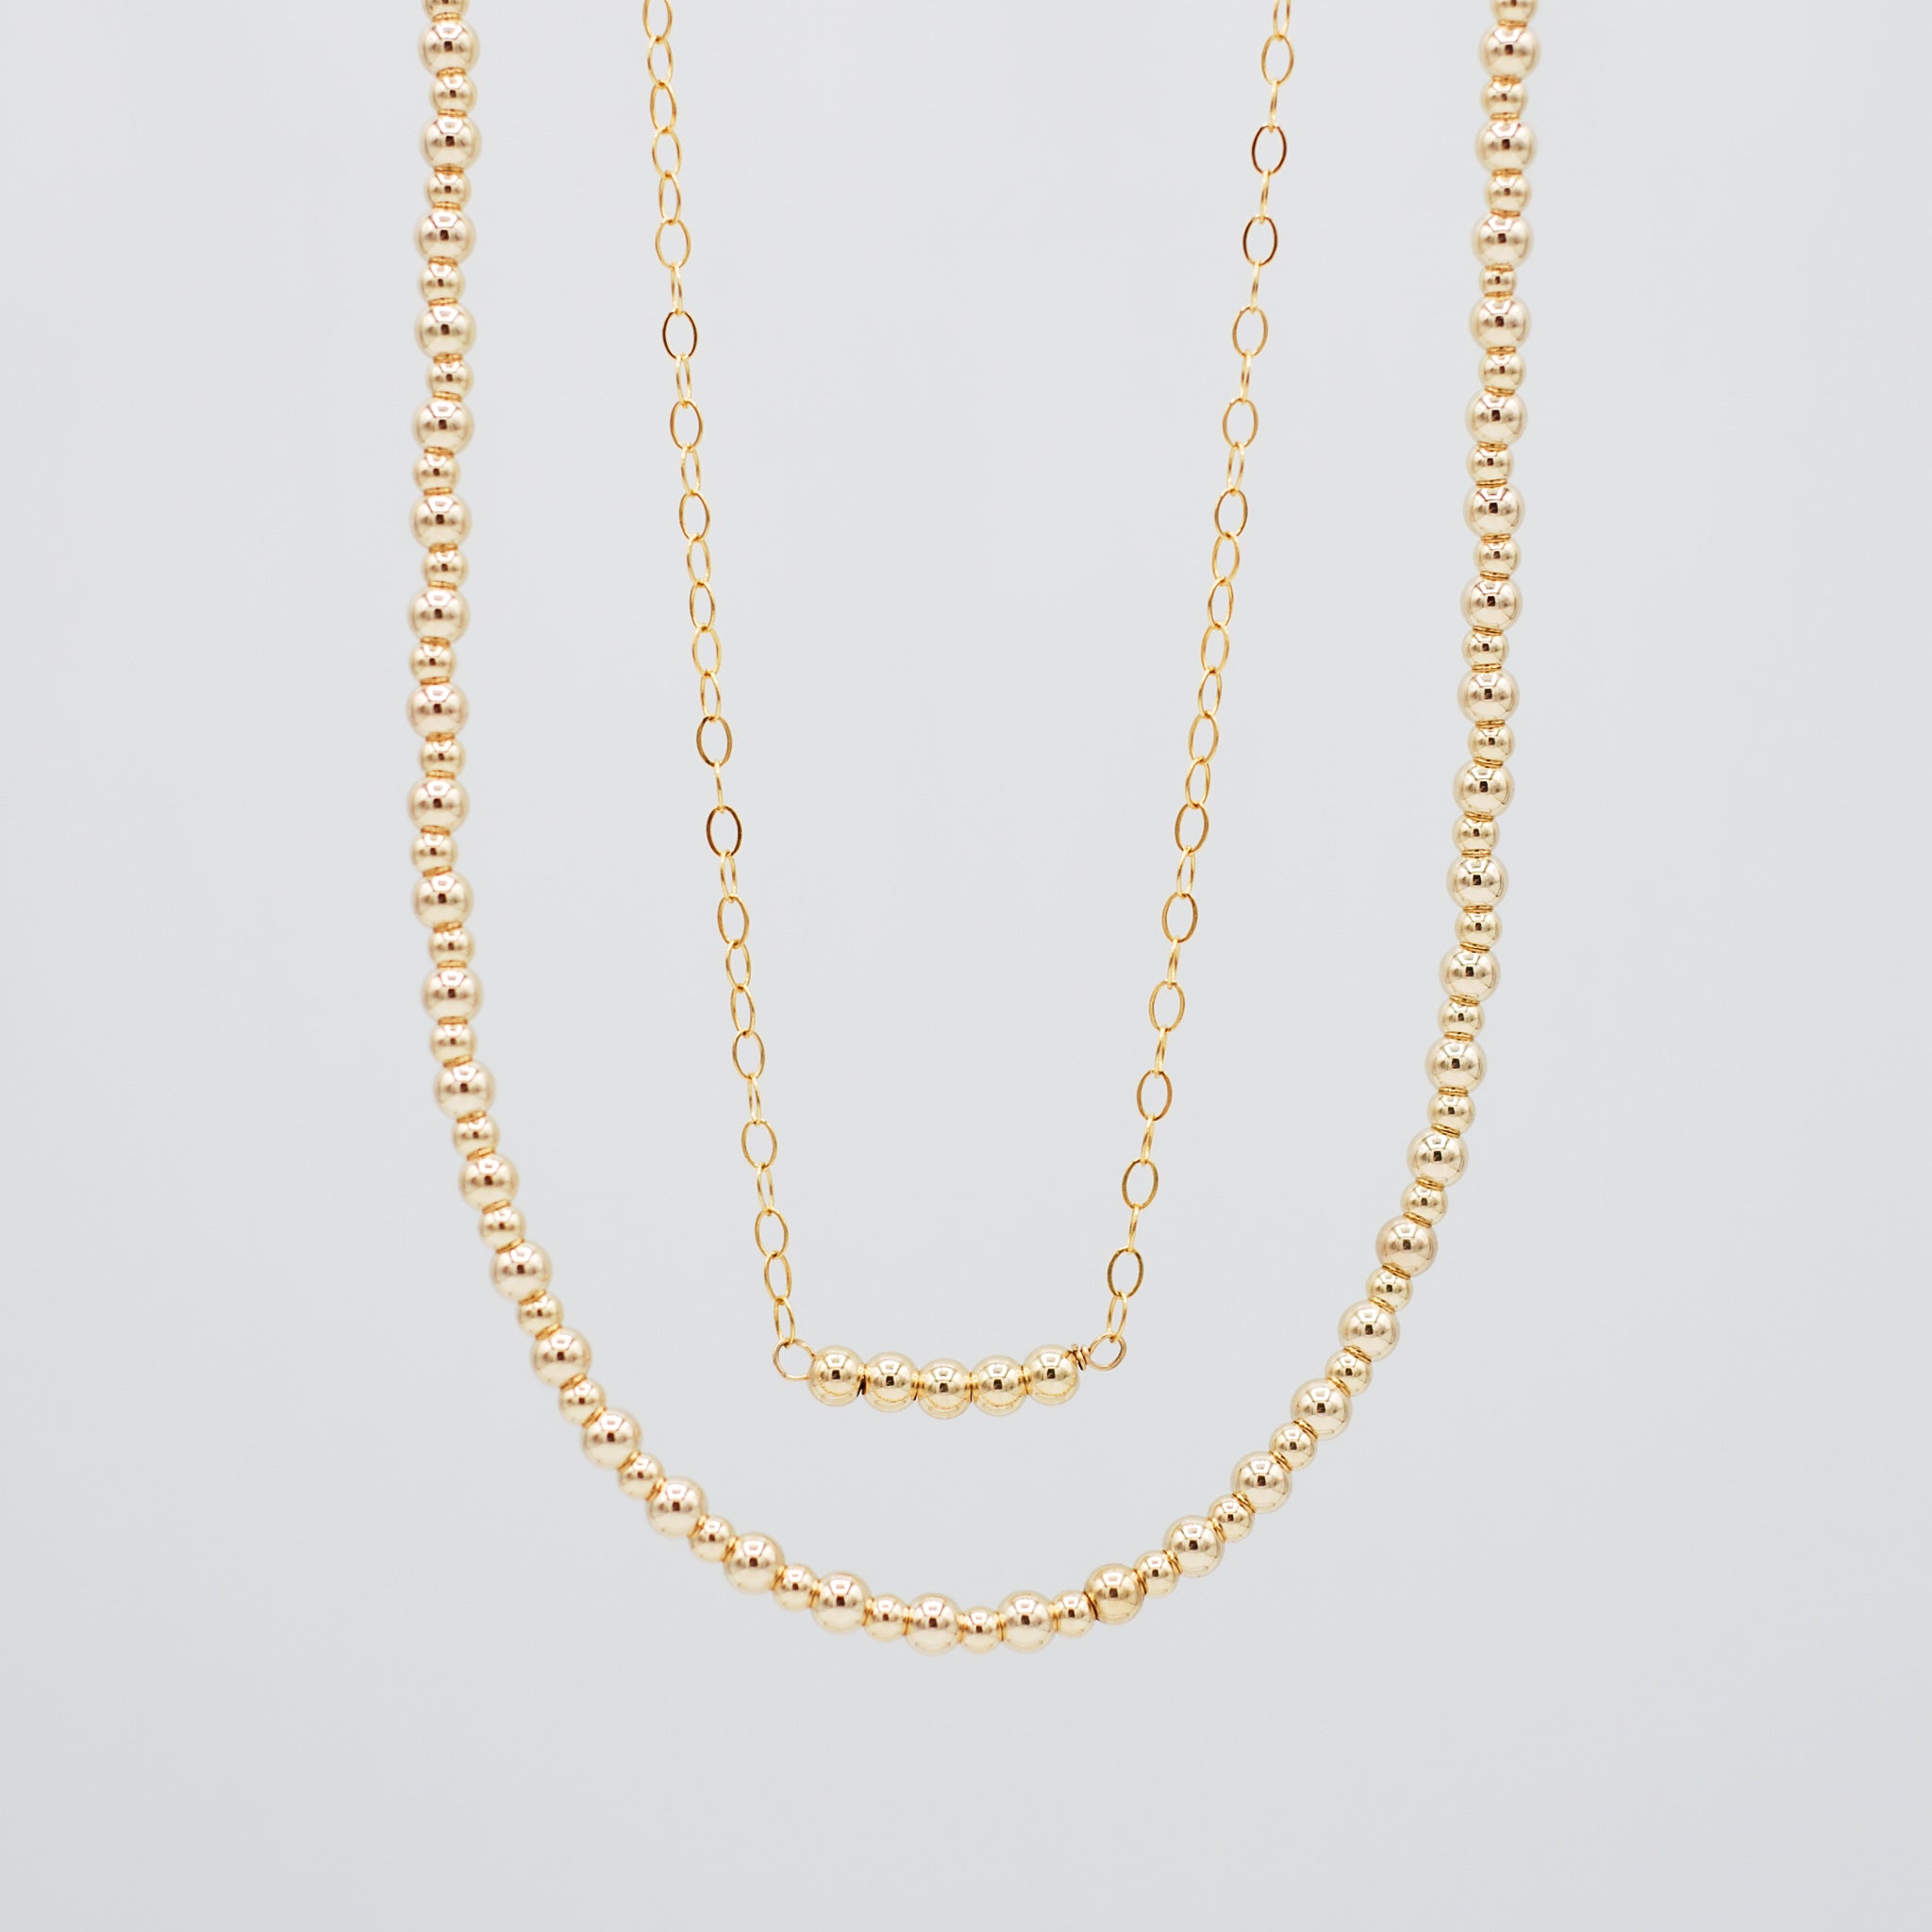 14k Gold Filled Bead Necklace